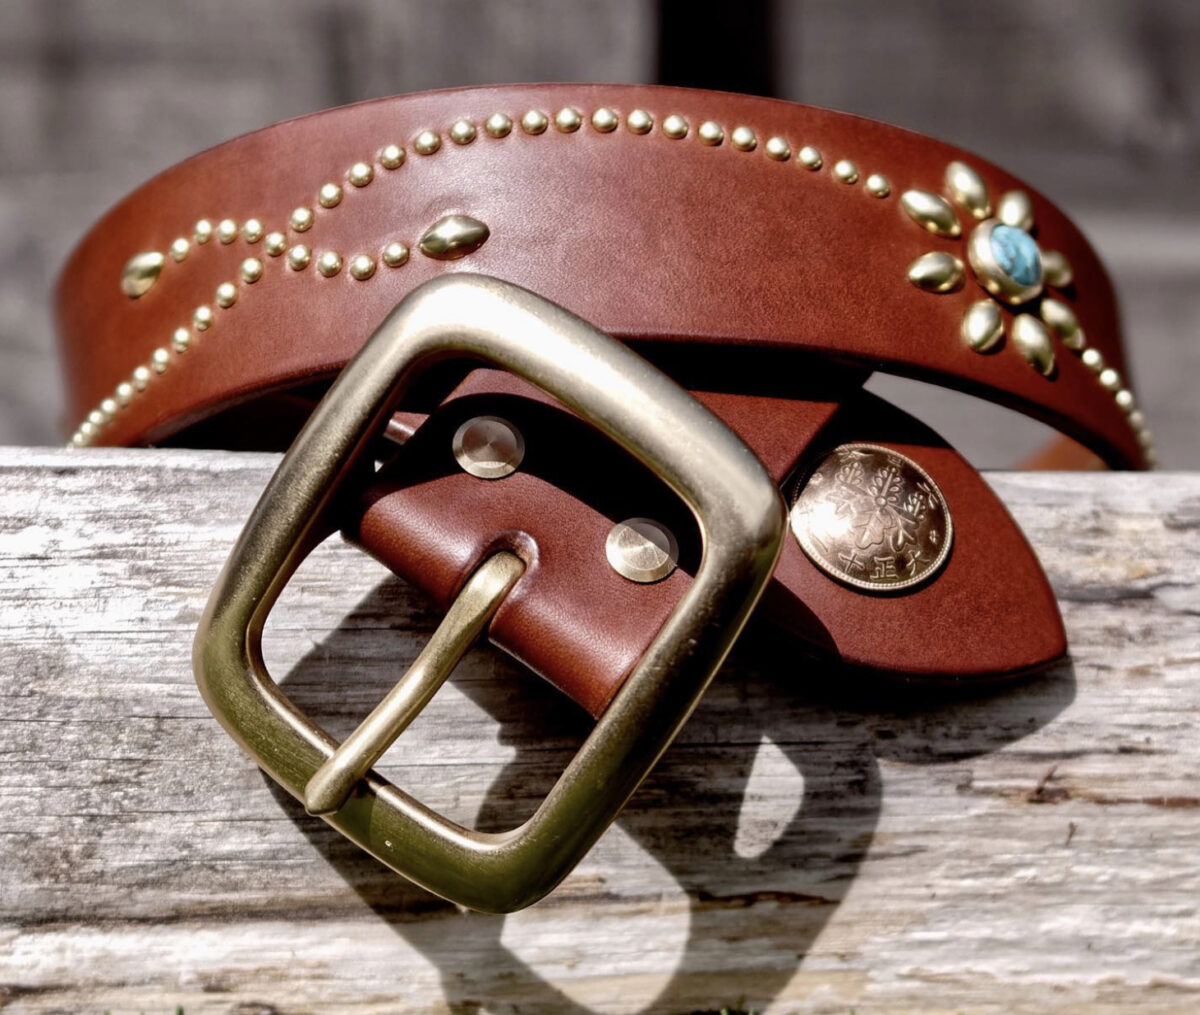 Interview: Duke - the custom belt maker without a name